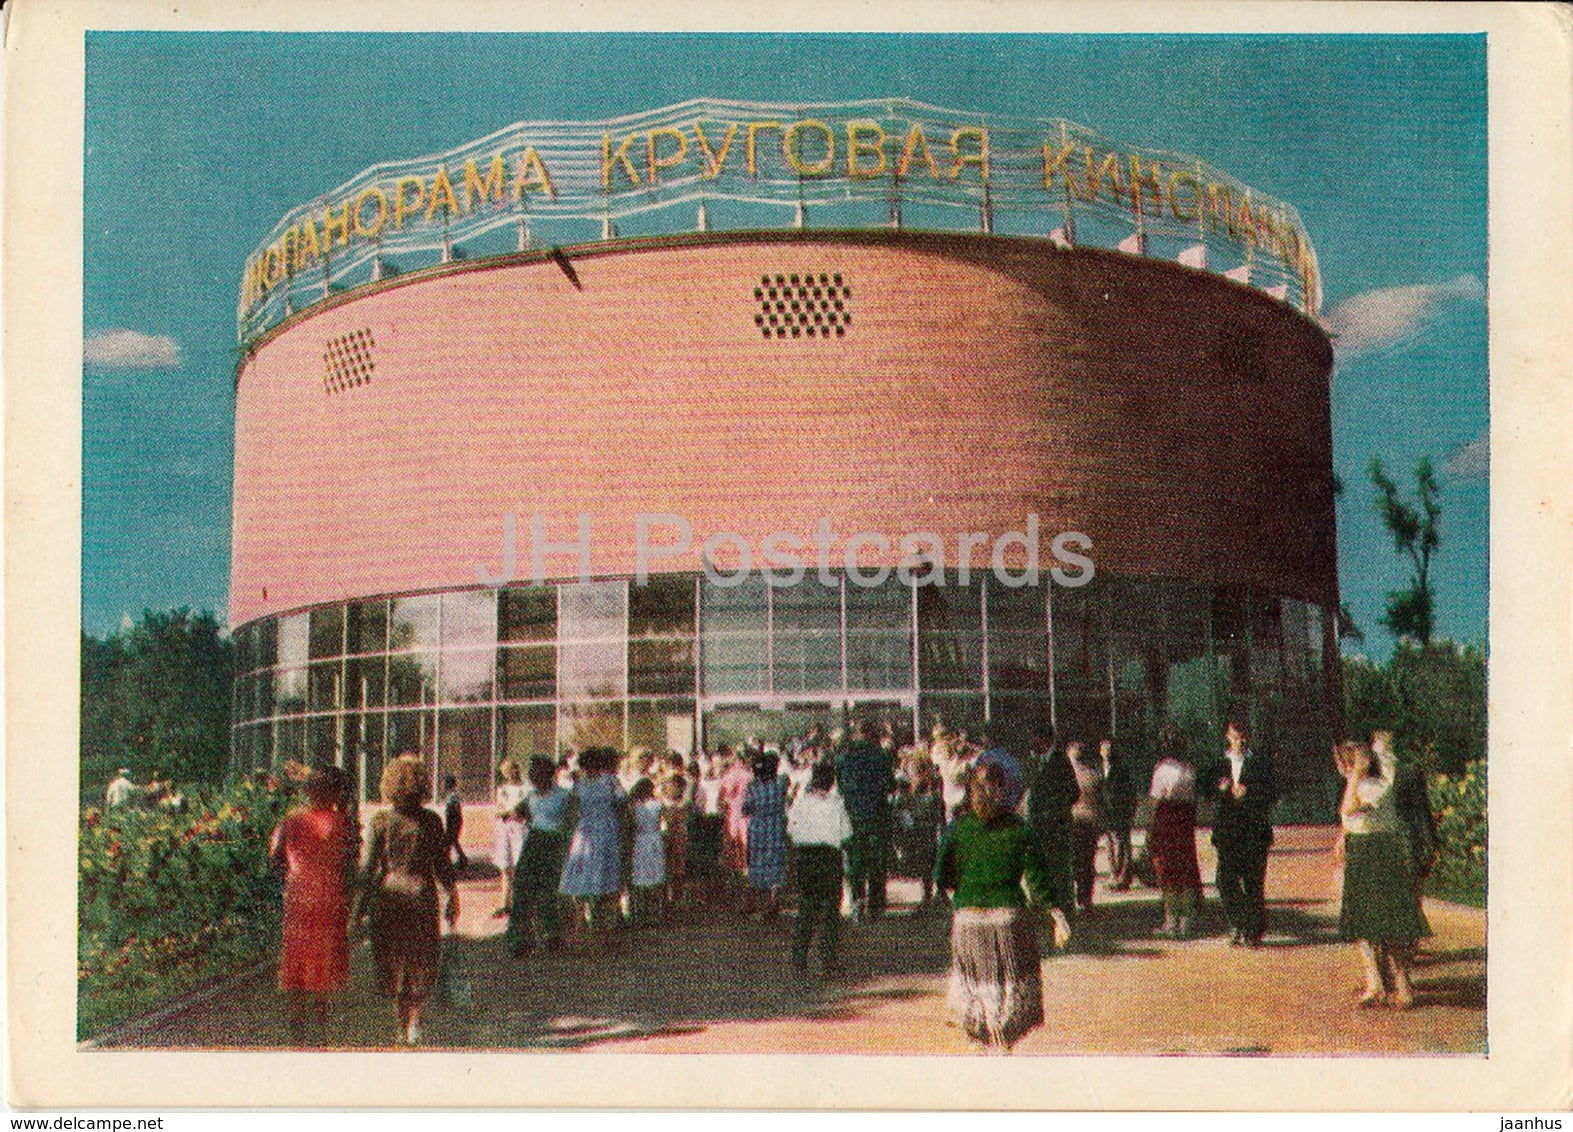 Moscow - Cinerama cinema - Exhibition of Achievements of National Economy - 1961 - Russia USSR - unused - JH Postcards